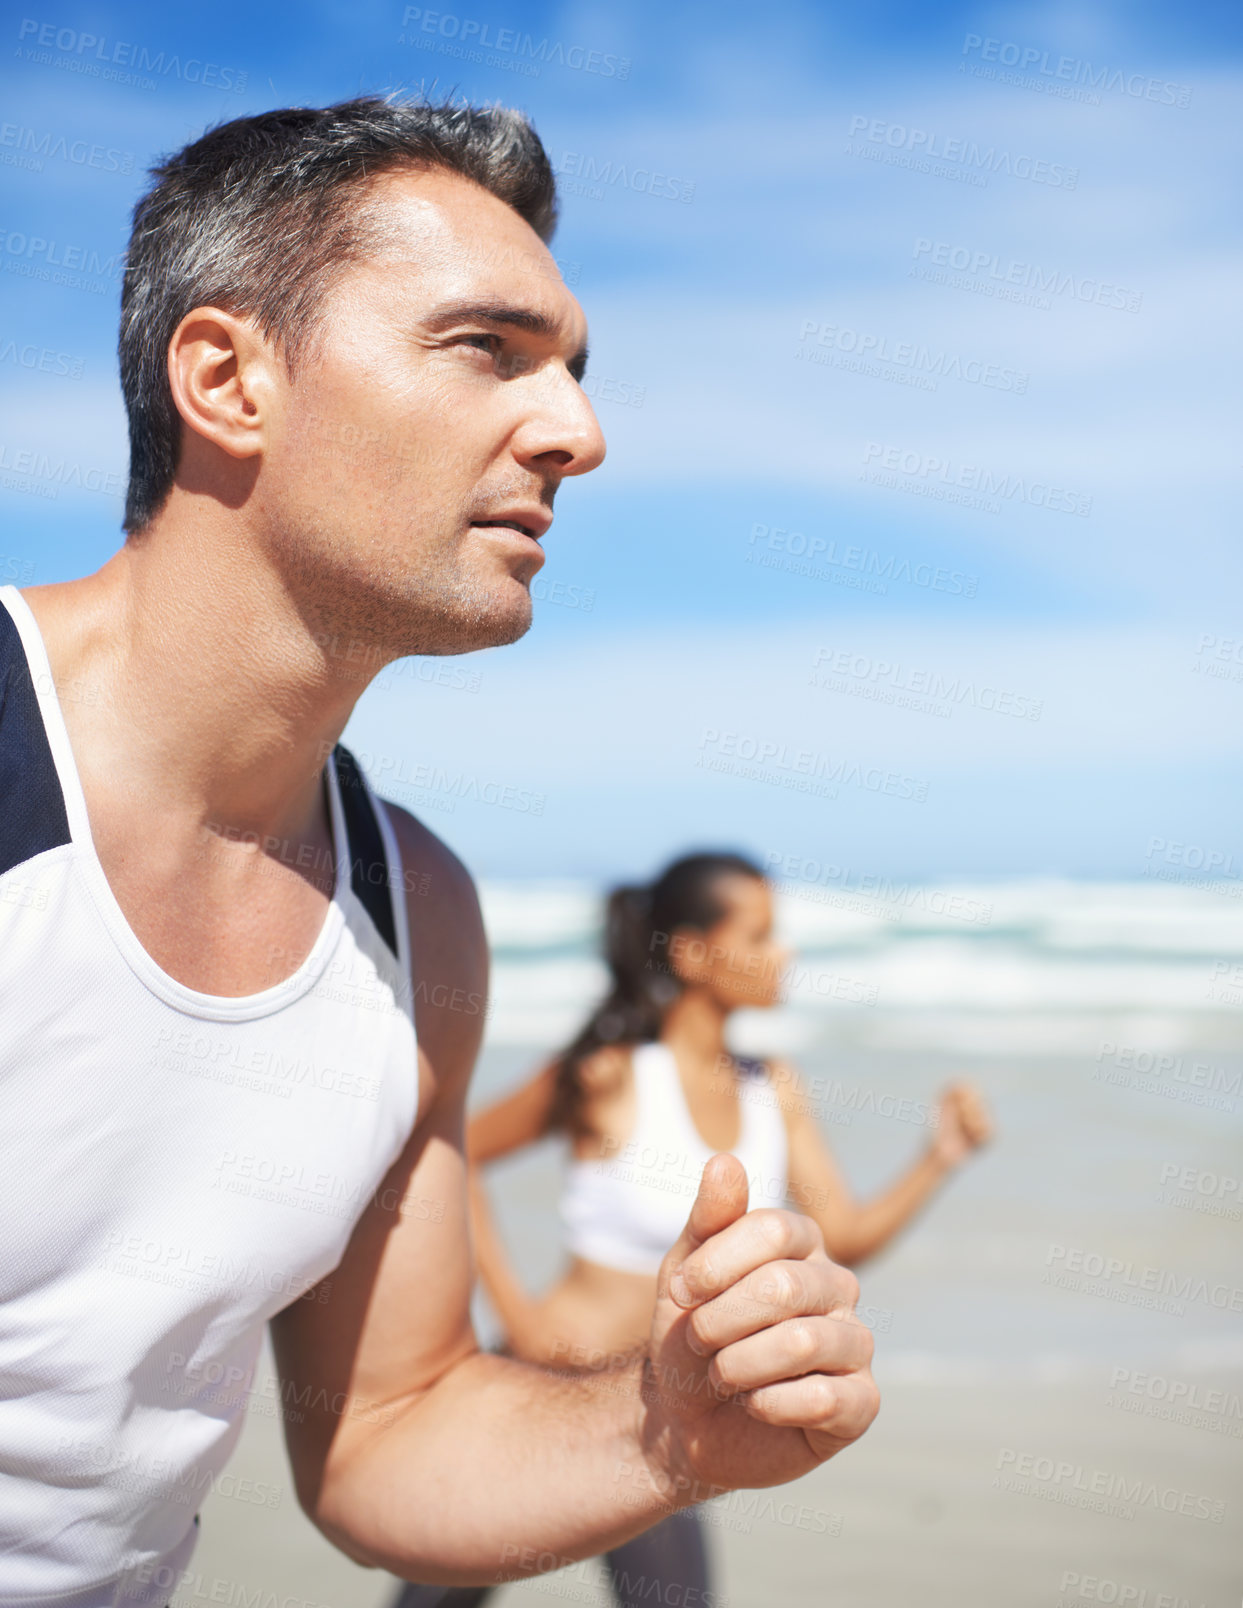 Buy stock photo Mature, man or people on beach running for exercise, training or outdoor workout at sea. Sports couple, runners or healthy athletes in nature for fitness endurance, wellness or challenge on sand